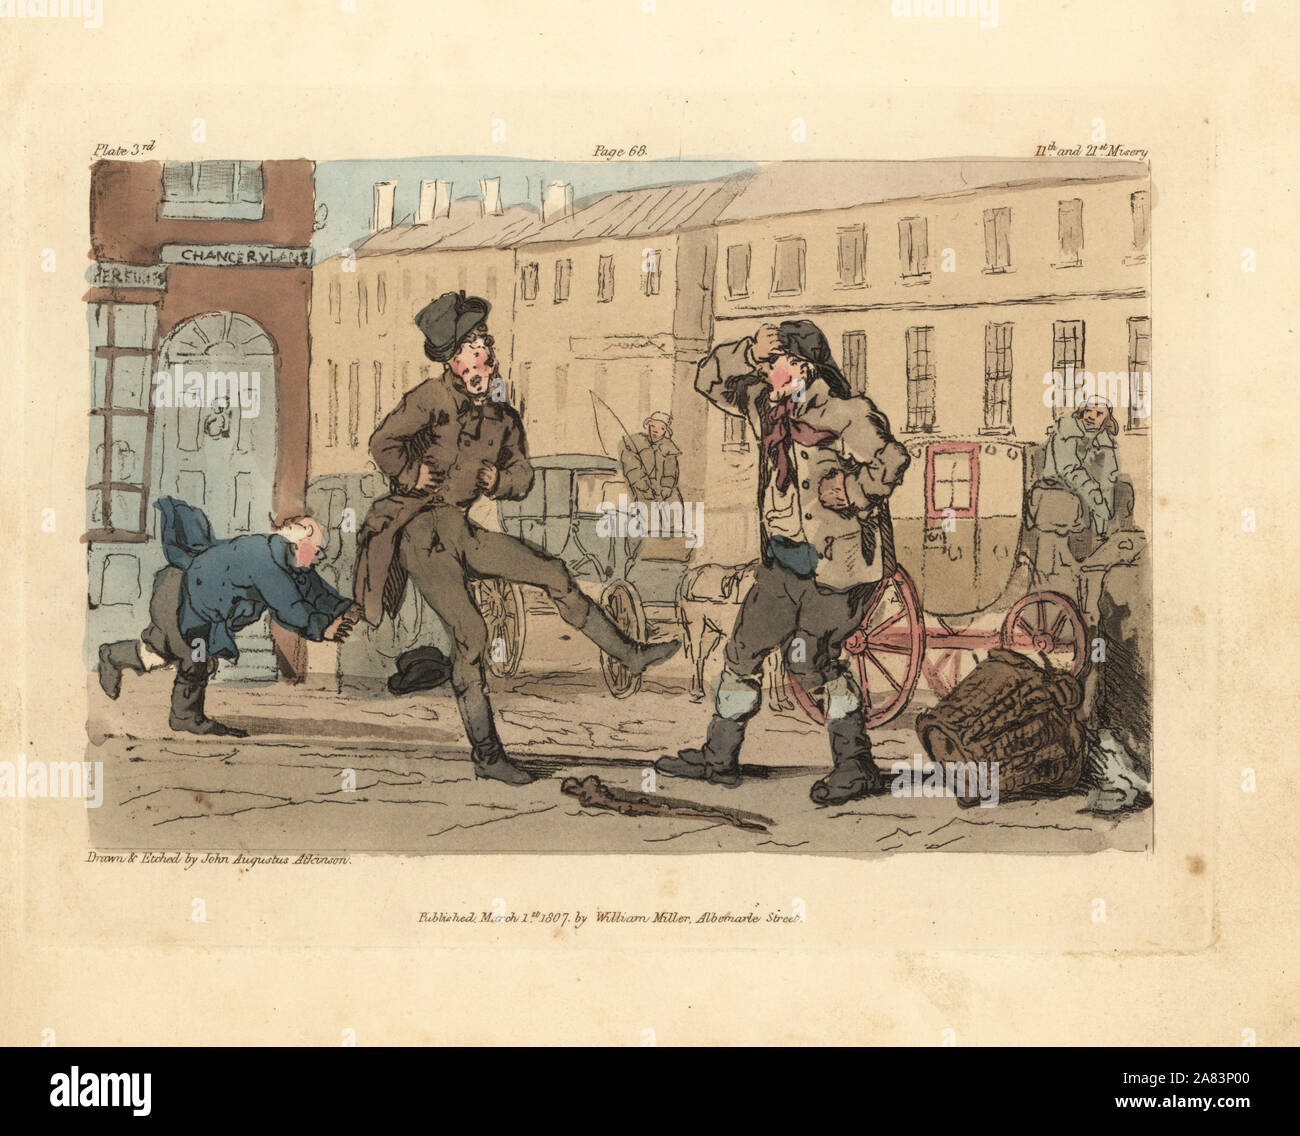 Headbutting collision between a gentleman and a scavenger on Chancery Lane, London. Handcoloured copperplate drawn and etched by John Augustus Atkinson from Illustrations of the Miseries of Human Life, William Miller, London, 1807. Stock Photo